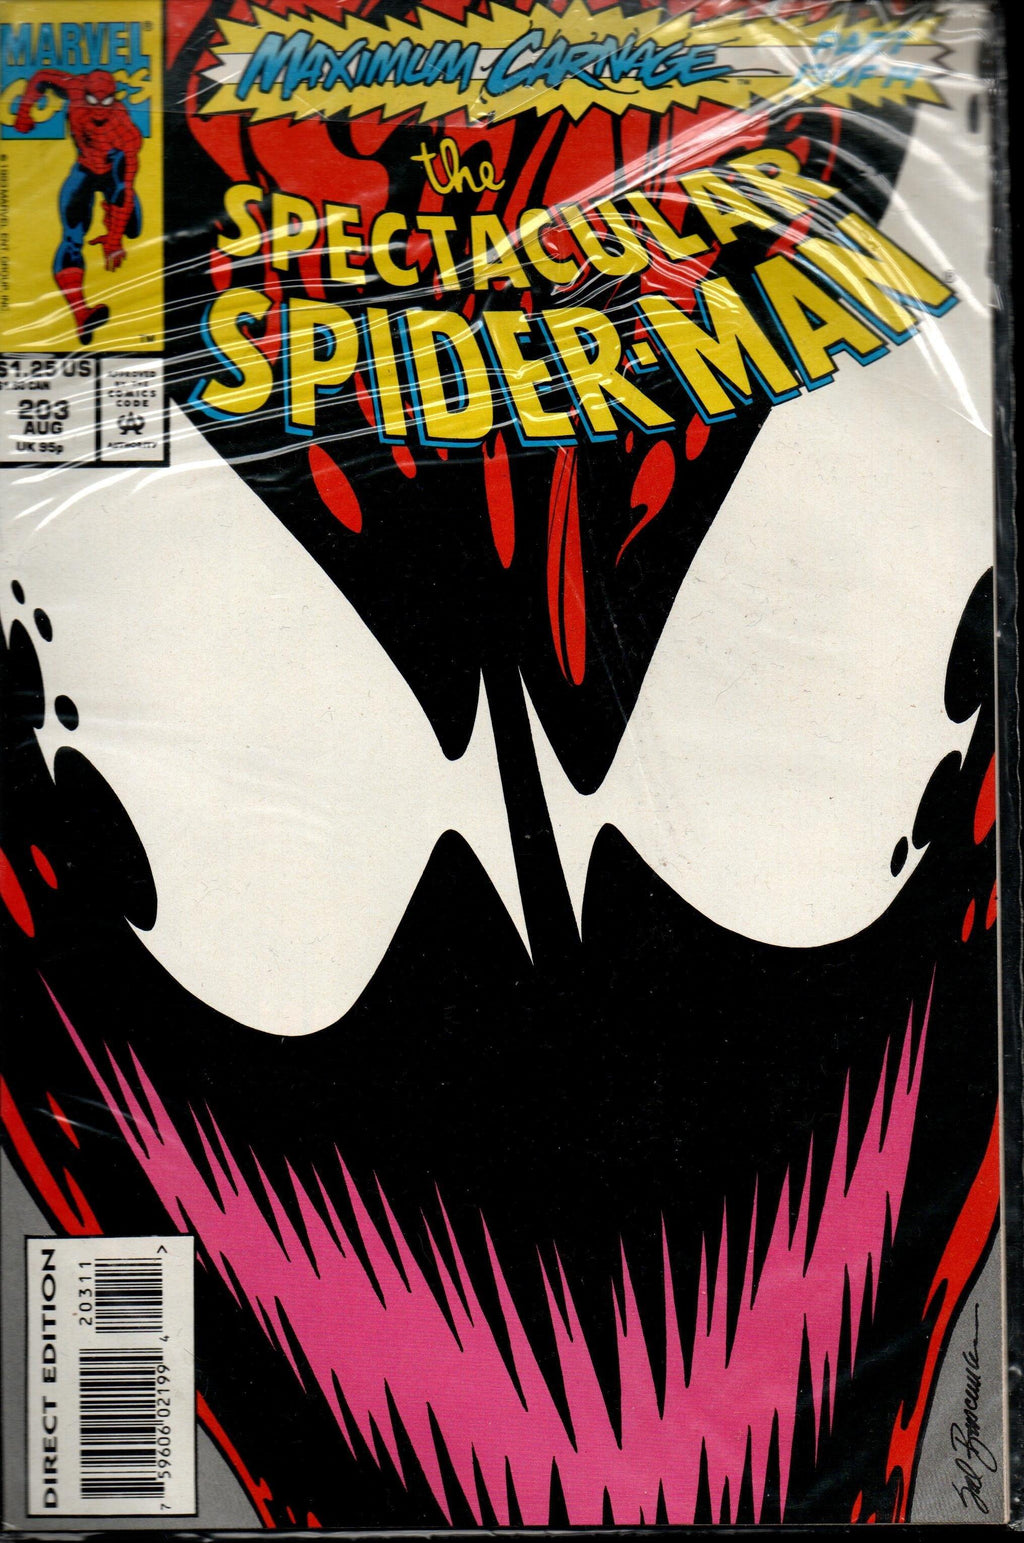 THE SPECTACULAR SPIDER-MAN #203 (1976 1ST SERIES) AUG 1993 MAXIMUM CARNAGE PART 13 OF 14